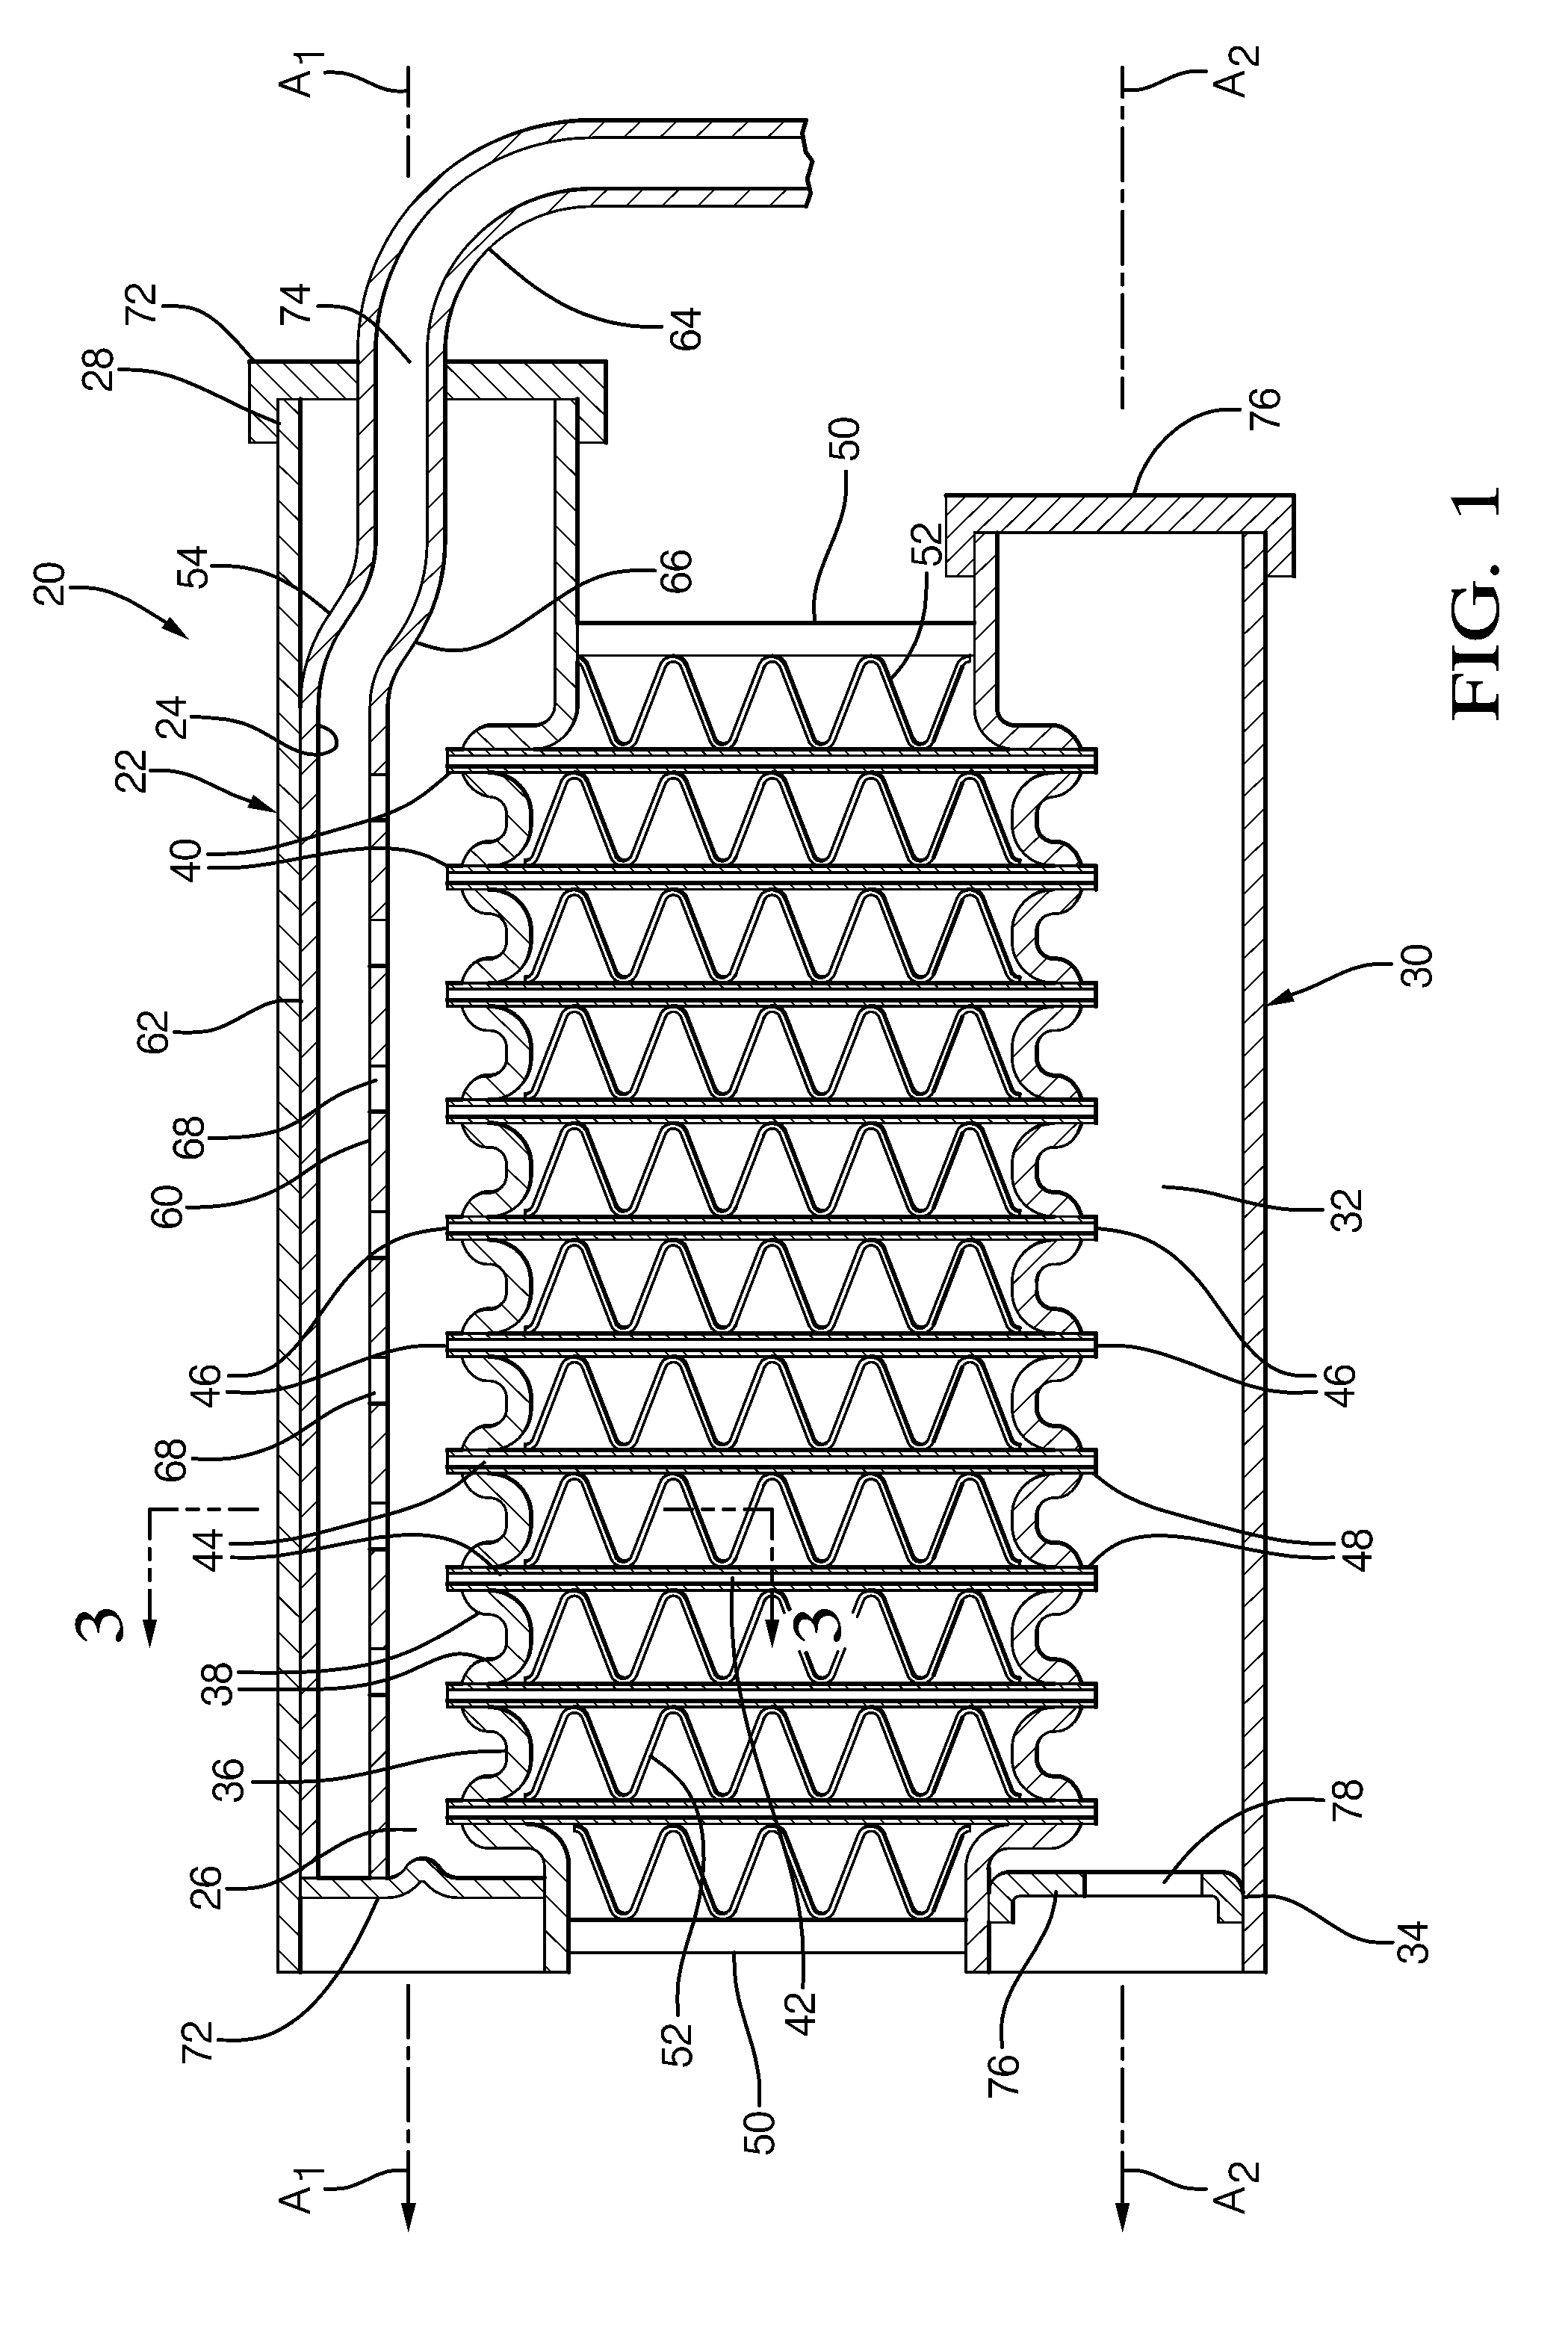 Non-cylindrical refrigerant conduit and method of making same